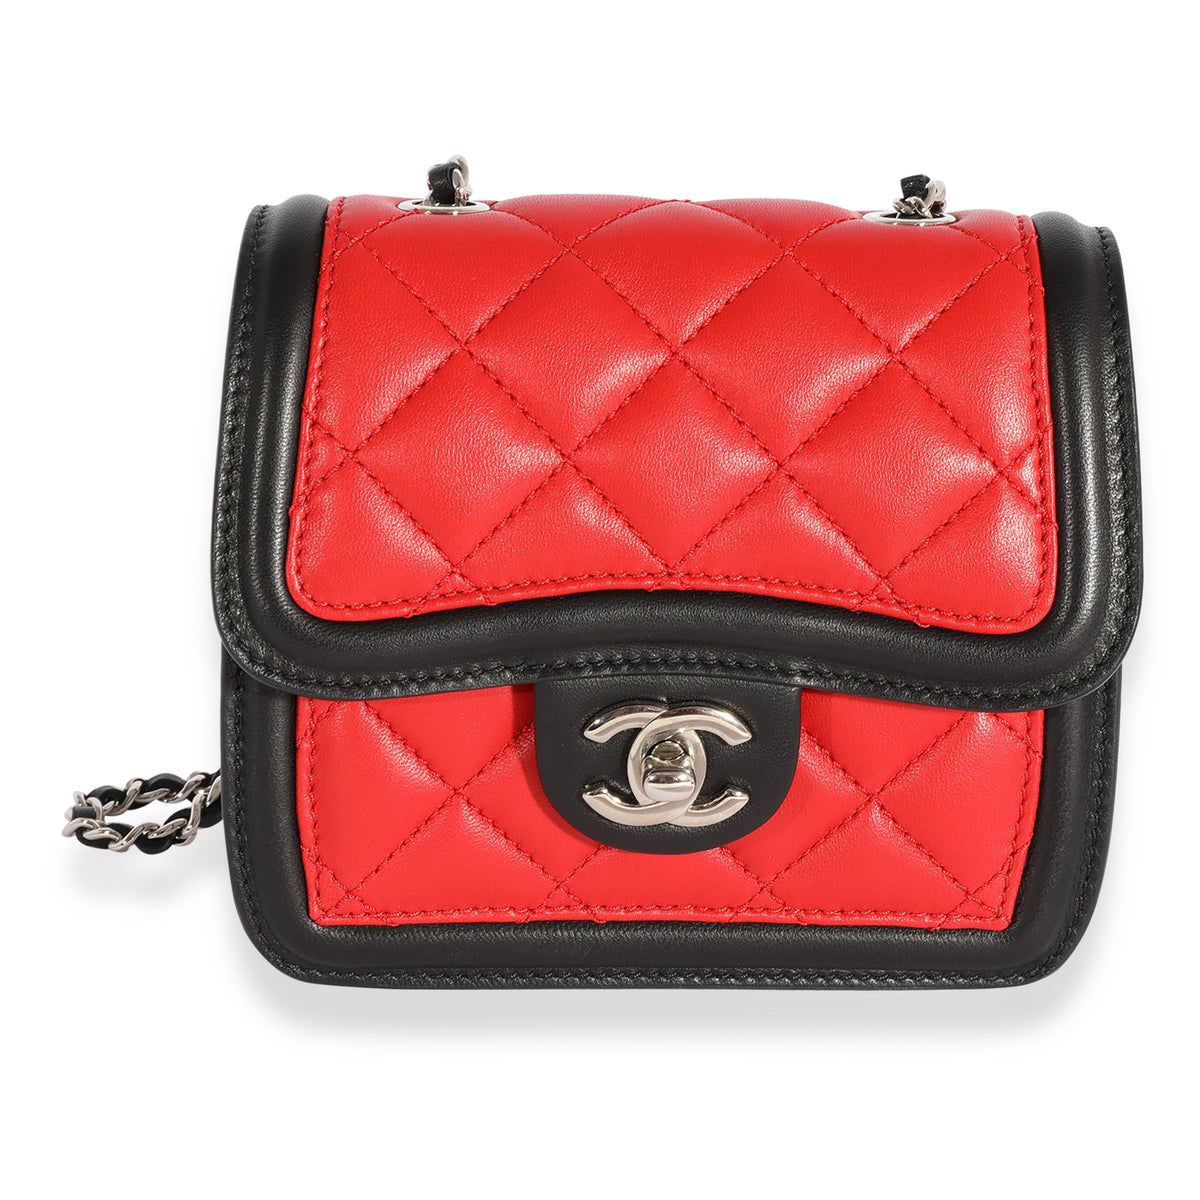 Chanel Tricolor Quilted Lambskin Mini Graphic Flap Bag